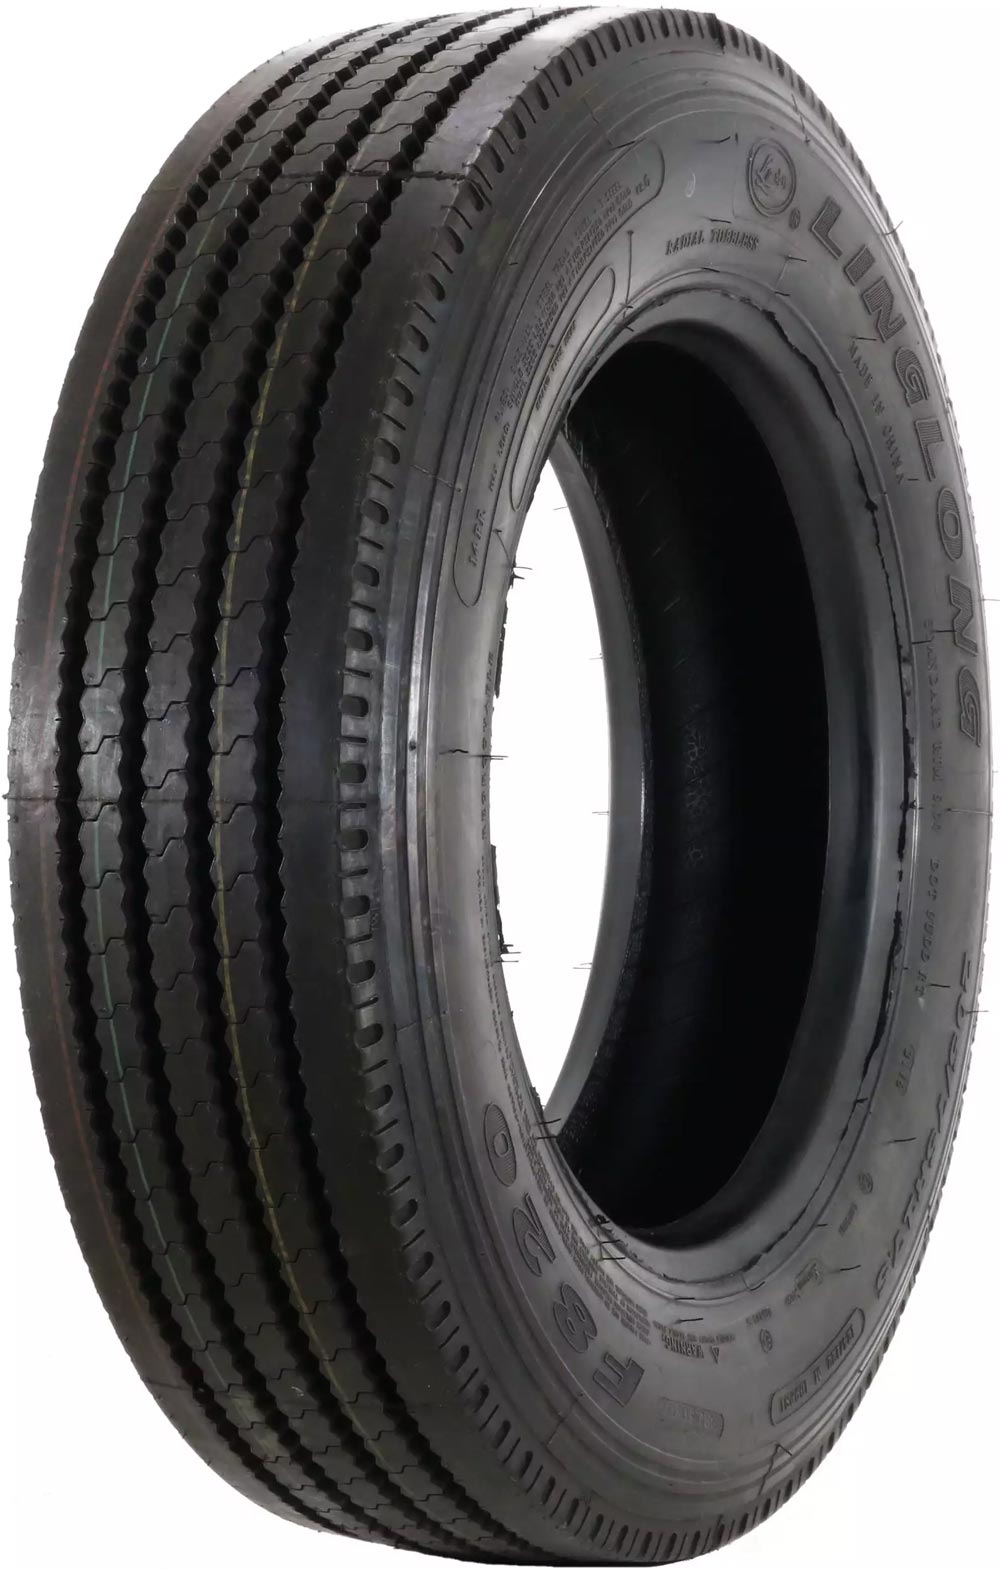 product_type-heavy_tires LINGLONG F820 16PR 245/70 R19.5 136M